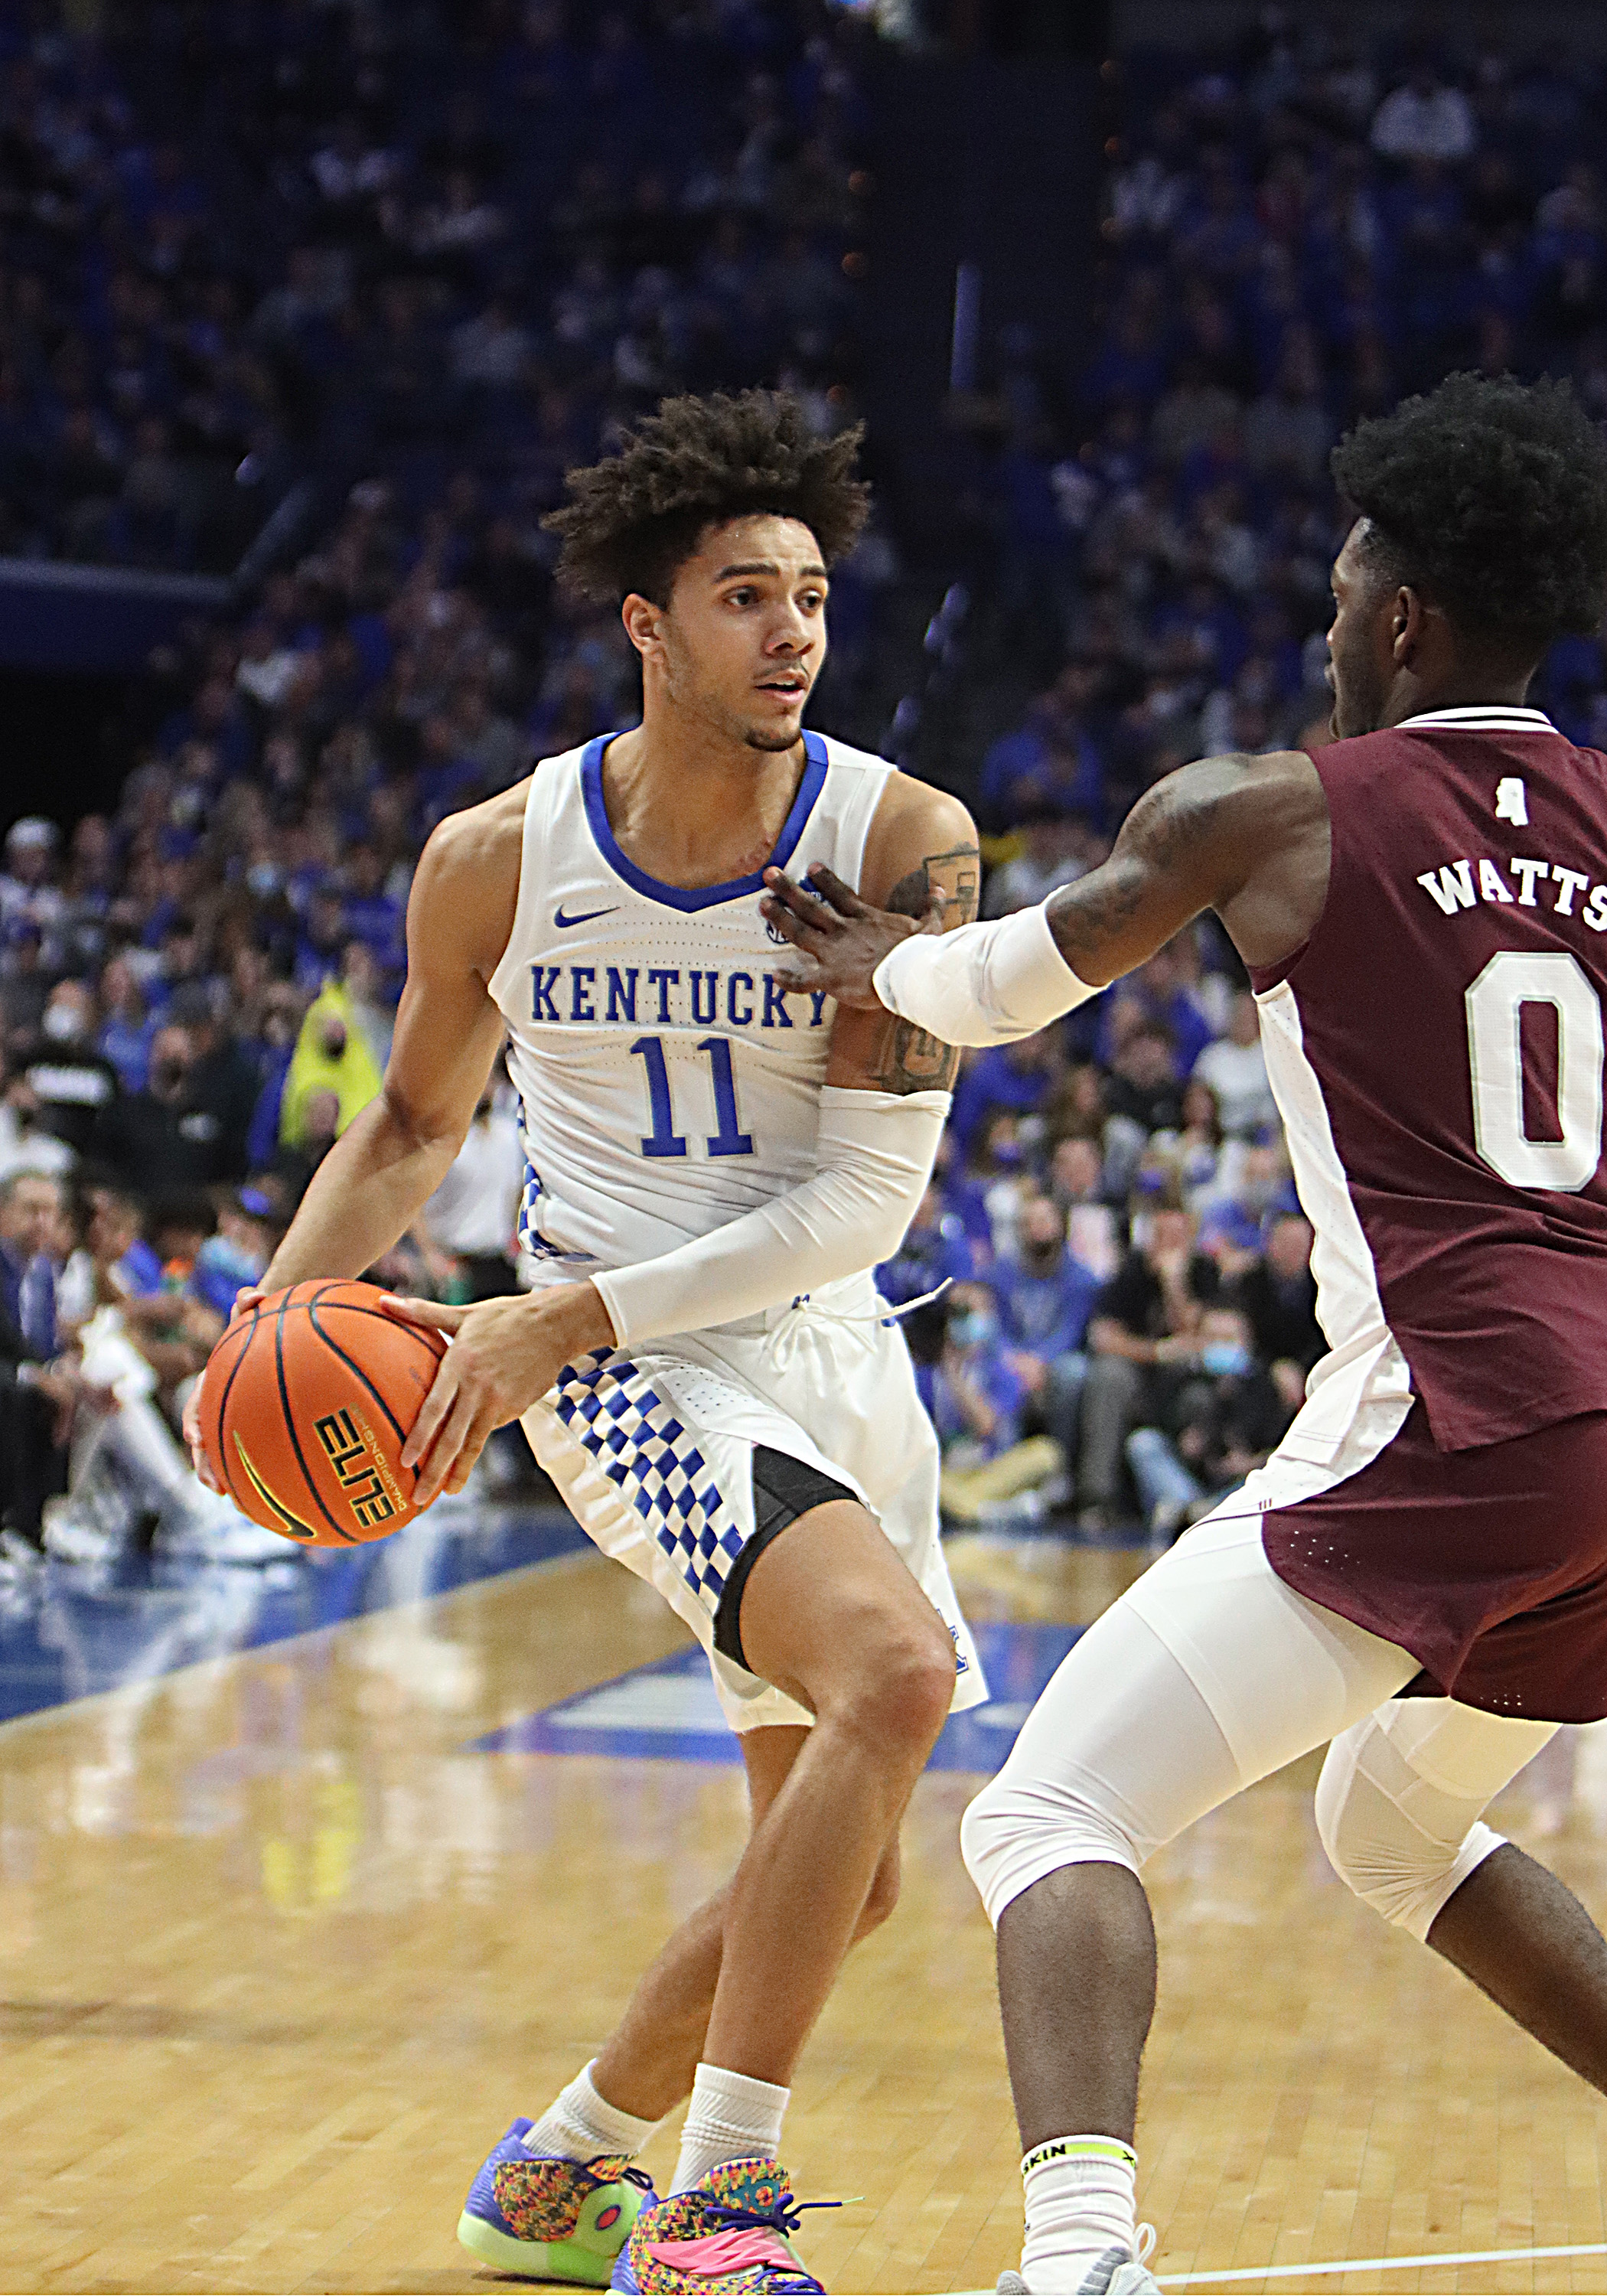 COLLEGE BASKETBALL: JAN 25 Mississippi State at Kentucky